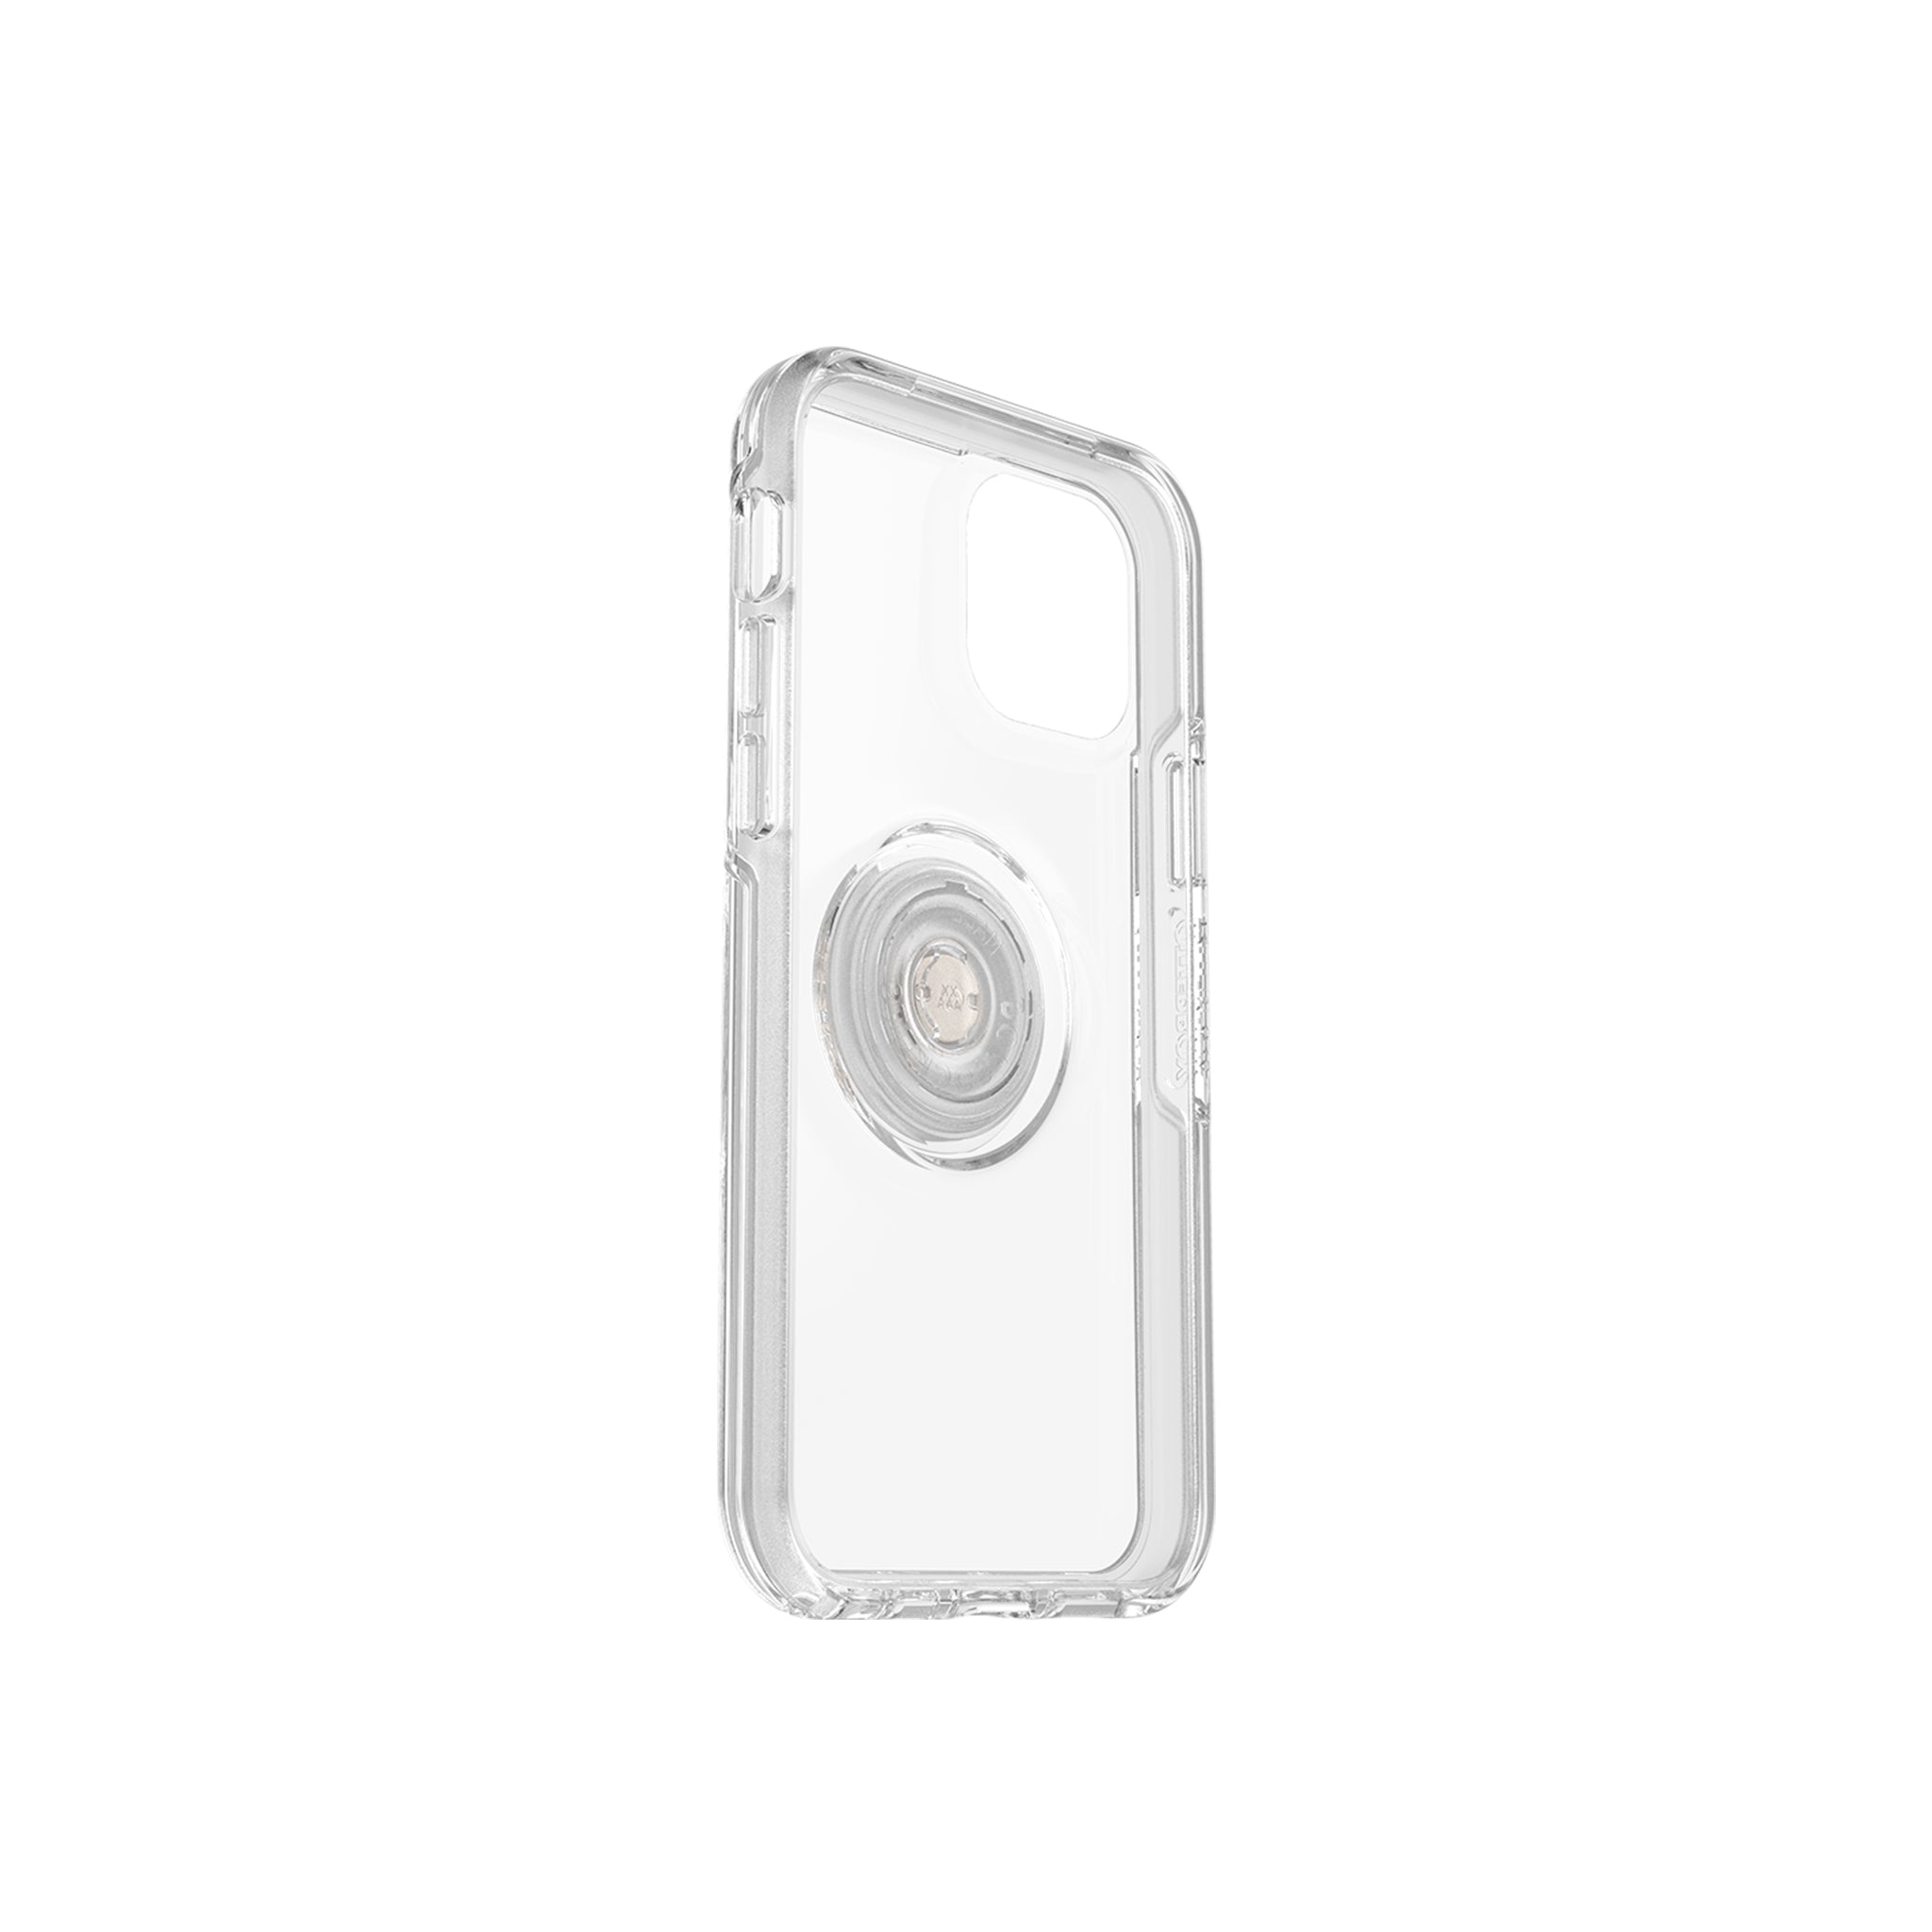 OtterBox - Otter + Pop Symettry  OTTER + POP SYMMETRY CLEAR IPHONE 12/12 PRO CLEAR POP